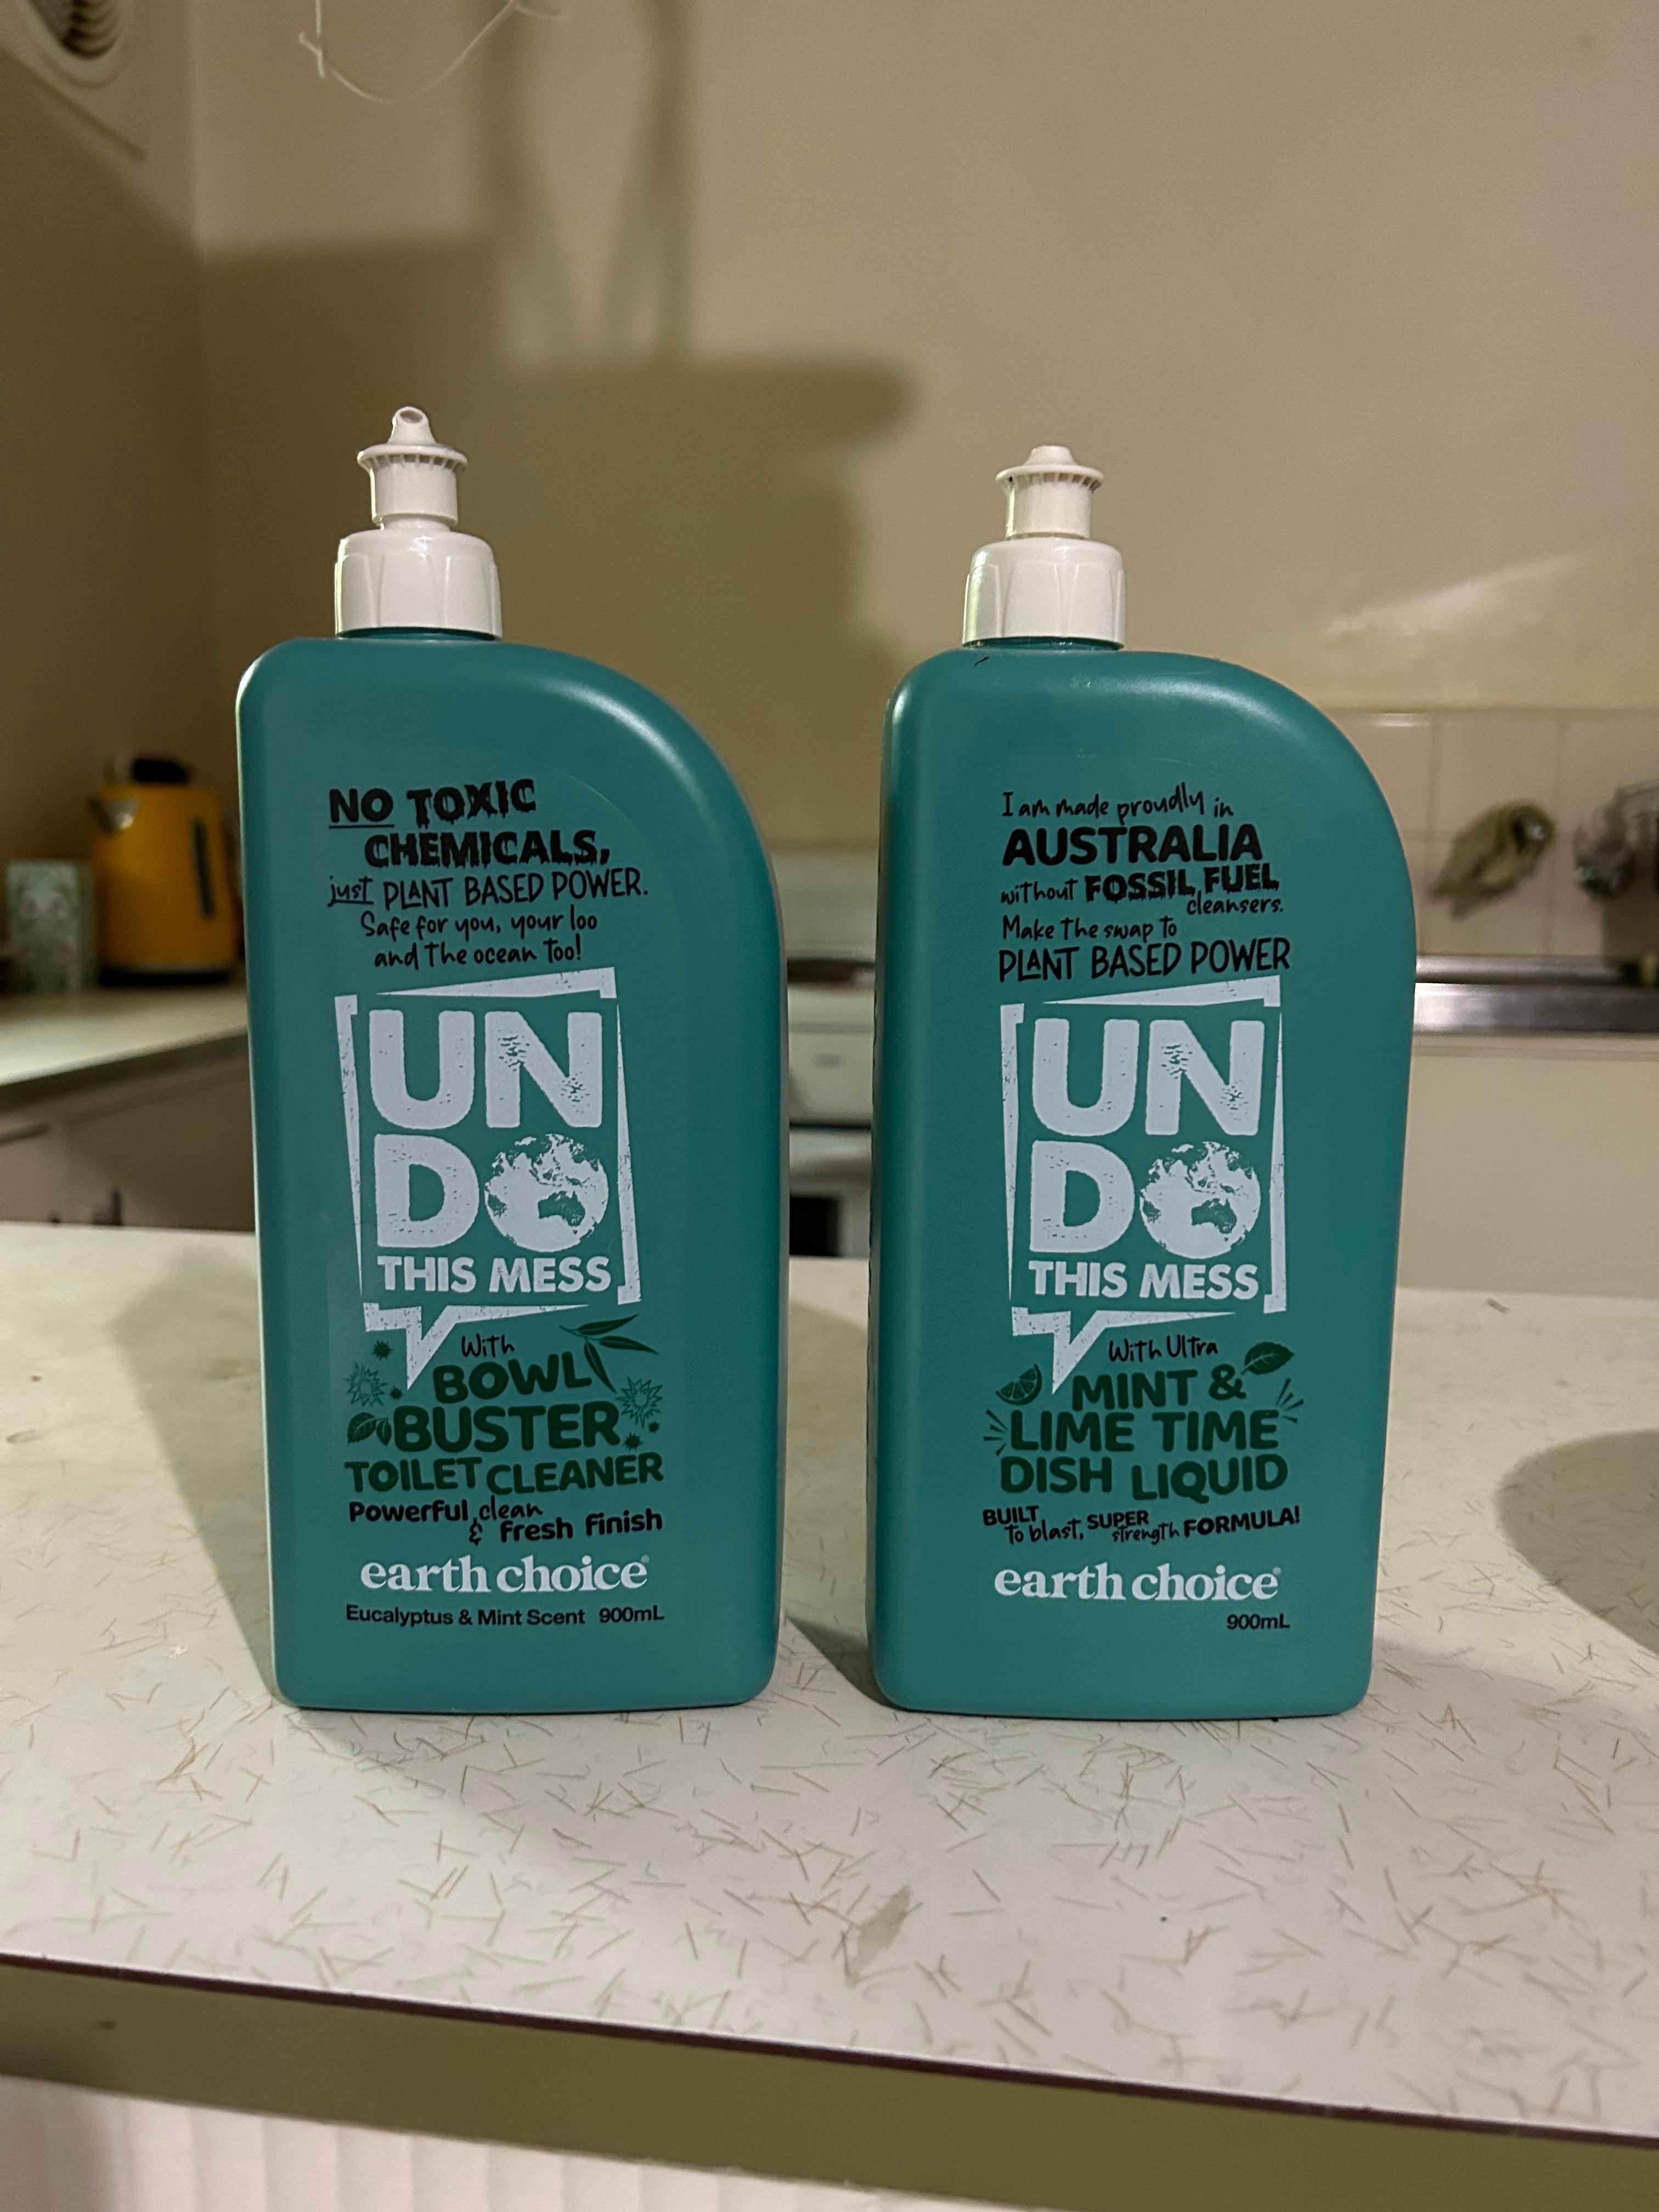 the two products in the same bottle design and labels